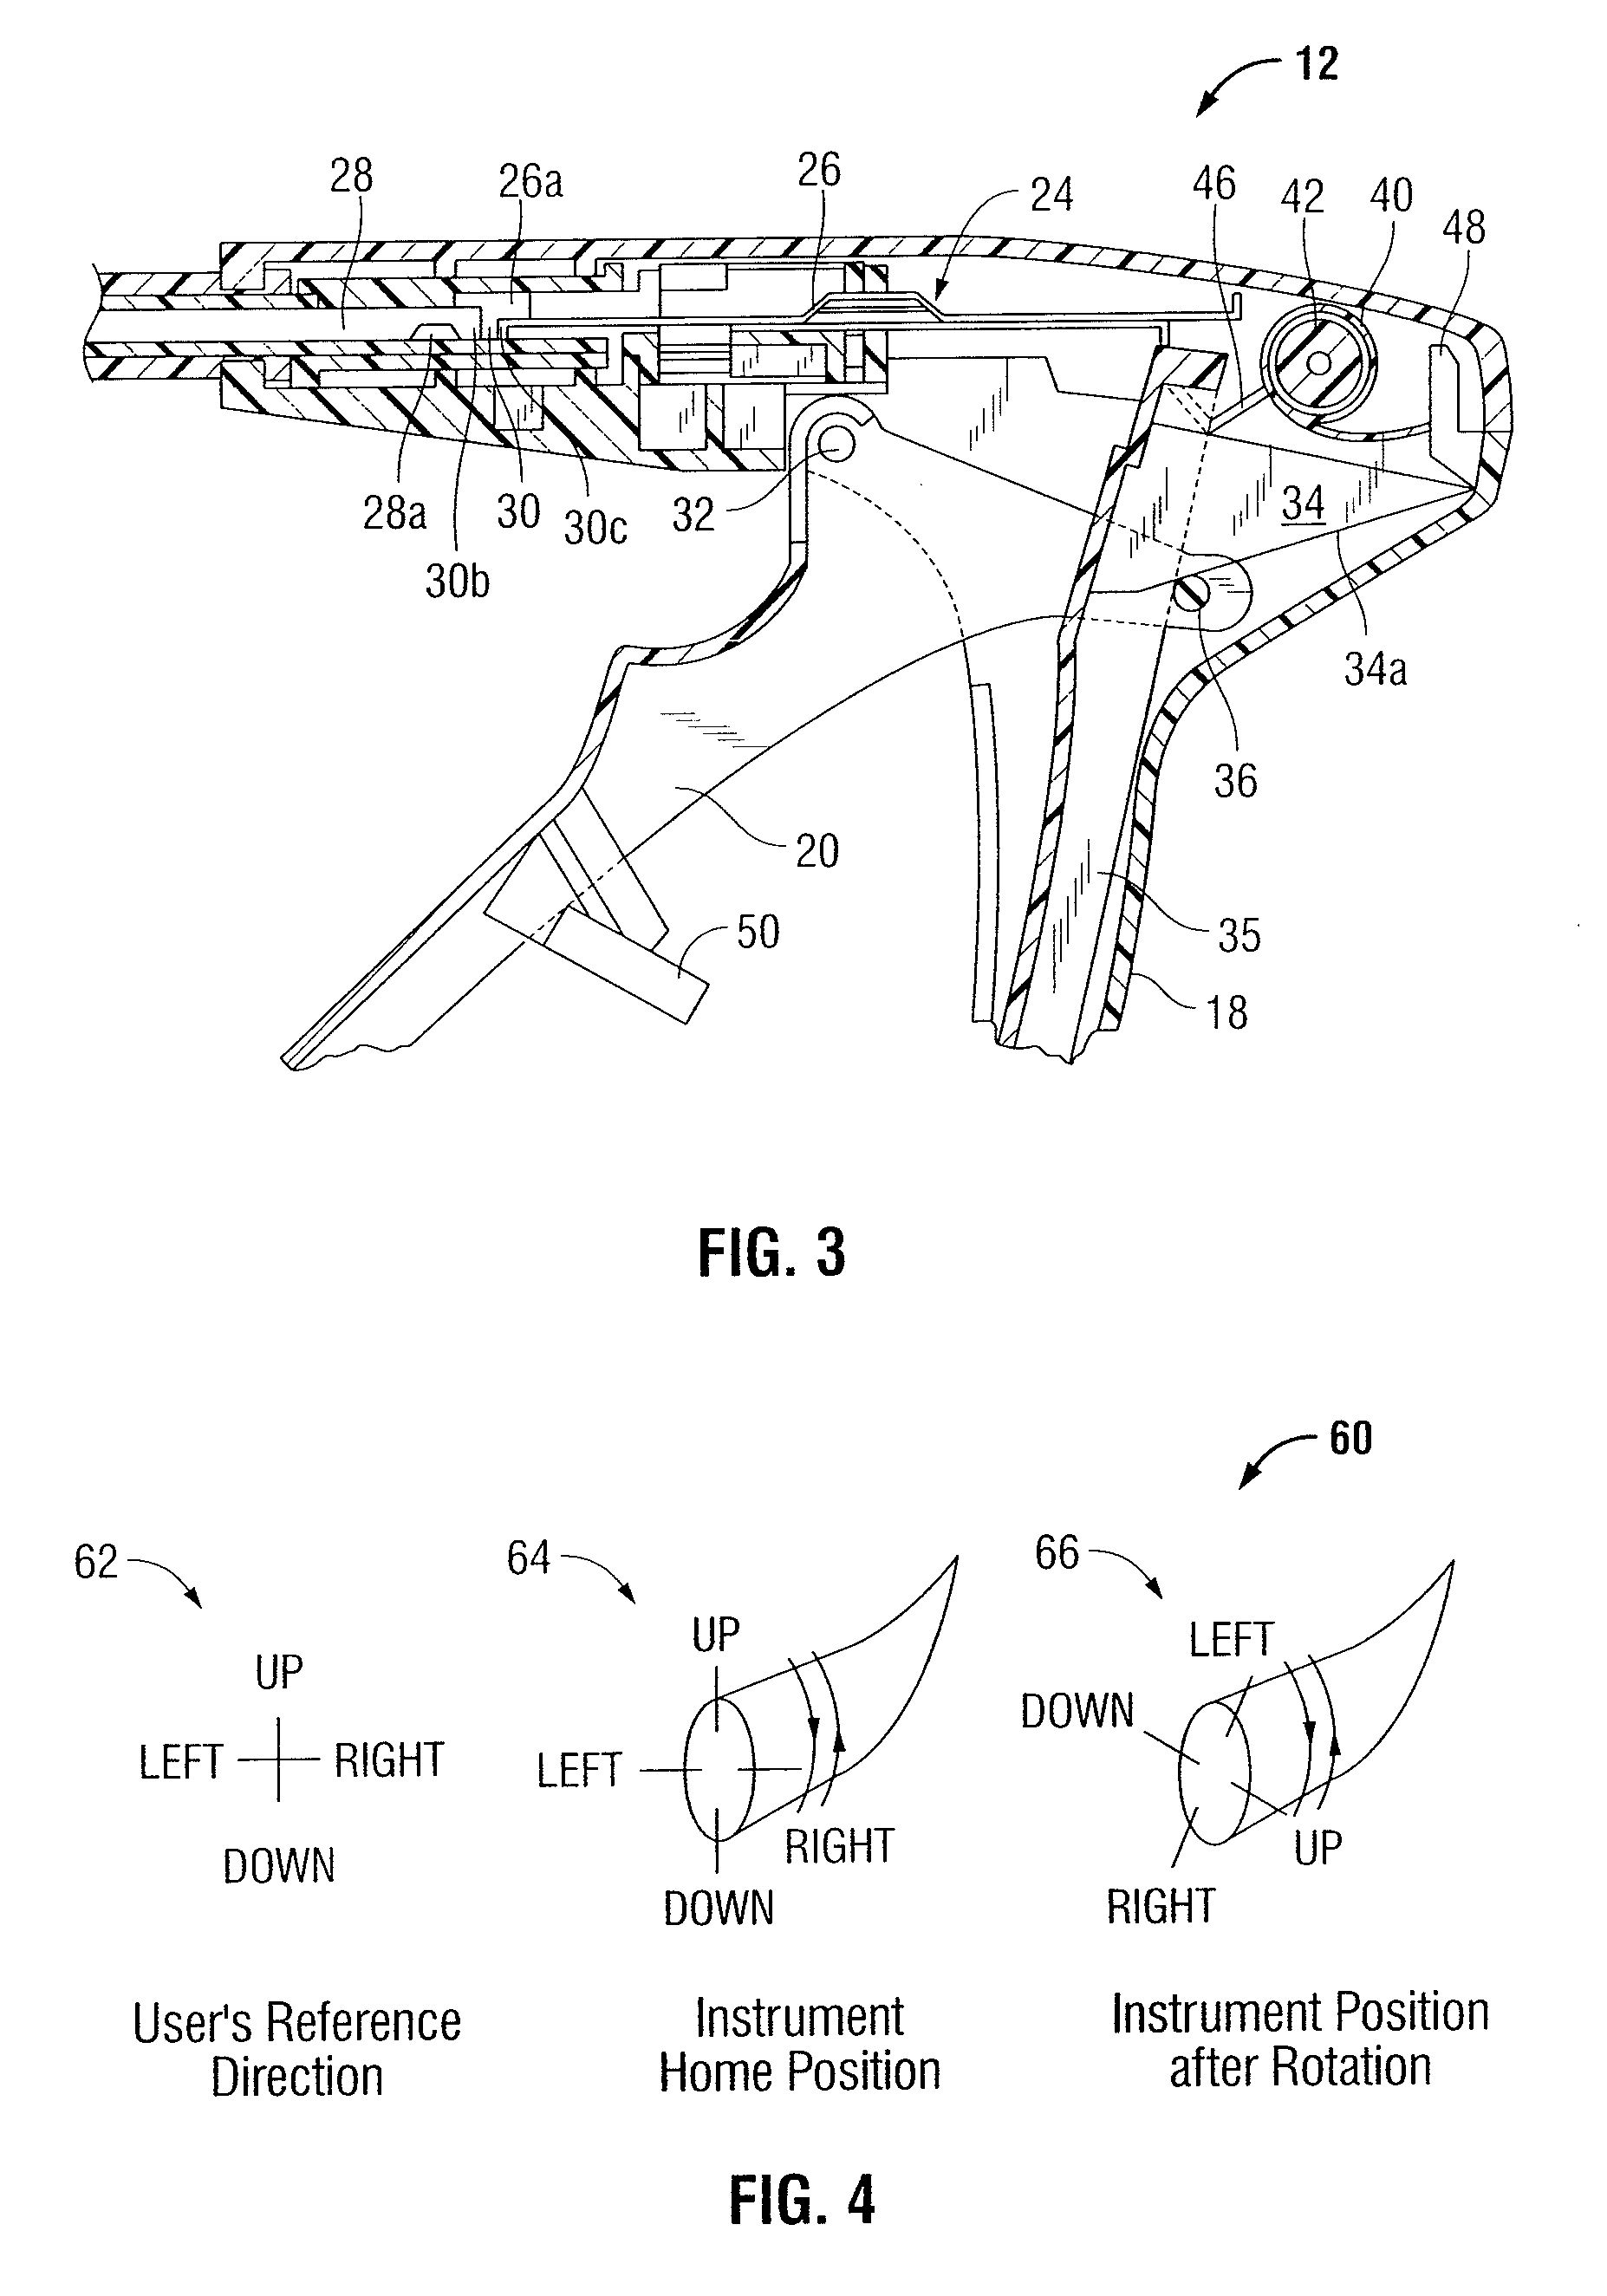 System and method for determining and adjusting positioning and orientation of a surgical device